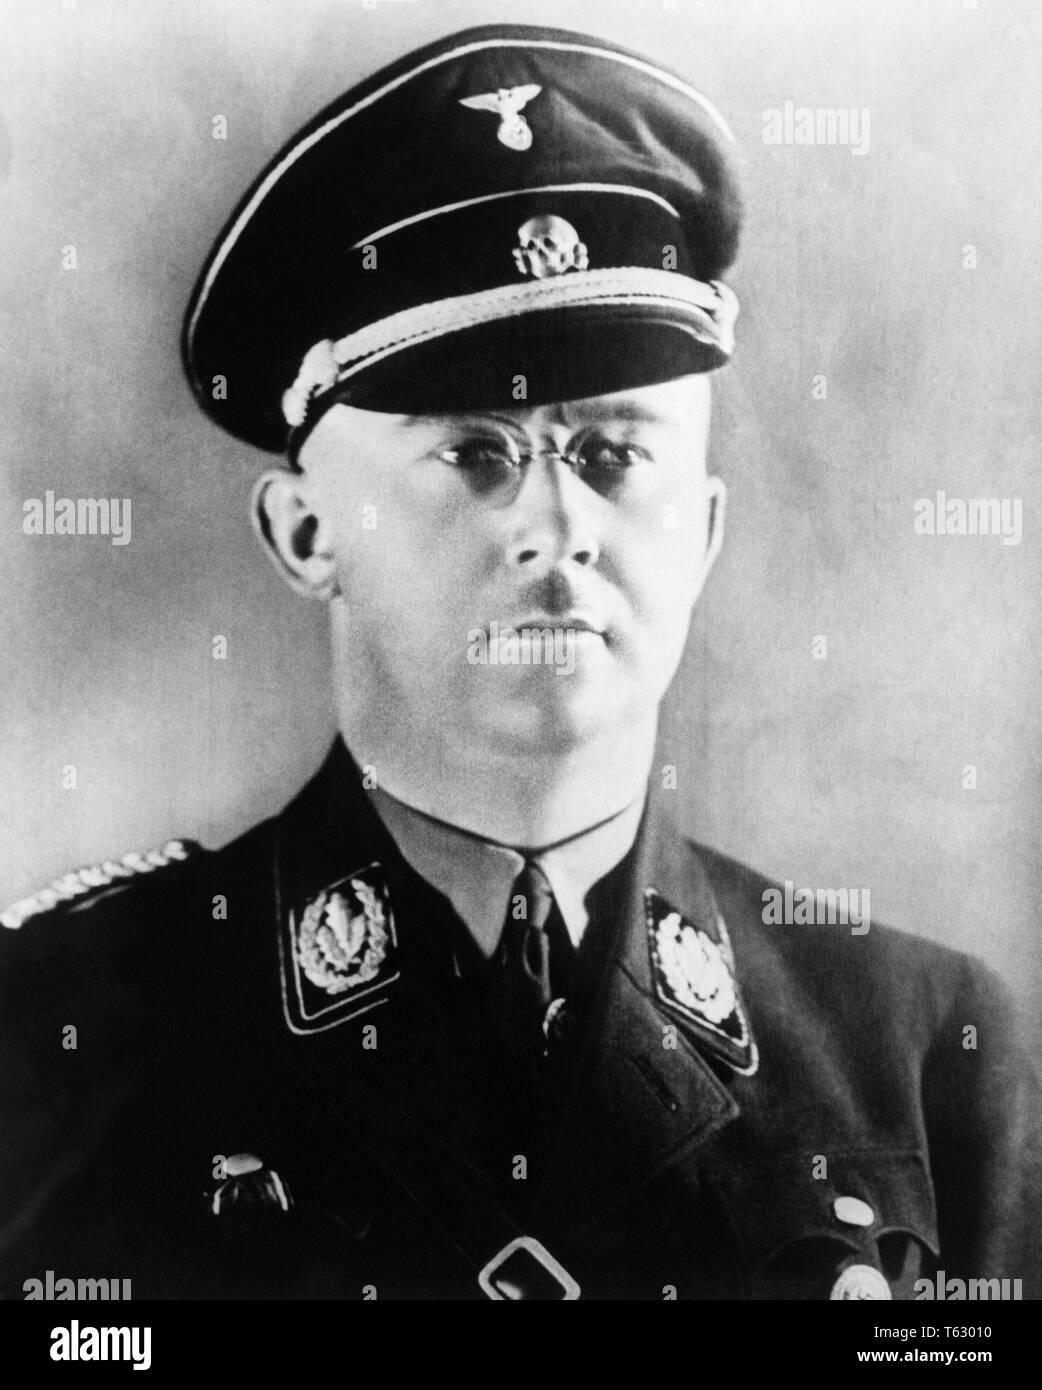 1930s 1940s PORTRAIT HEINRICH HIMMLER COMMANDER OF GERMAN NAZI SS  - q72083 CPC001 HARS MID-ADULT MID-ADULT MAN SS SUICIDE BLACK AND WHITE CAUCASIAN ETHNICITY OLD FASHIONED Stock Photo